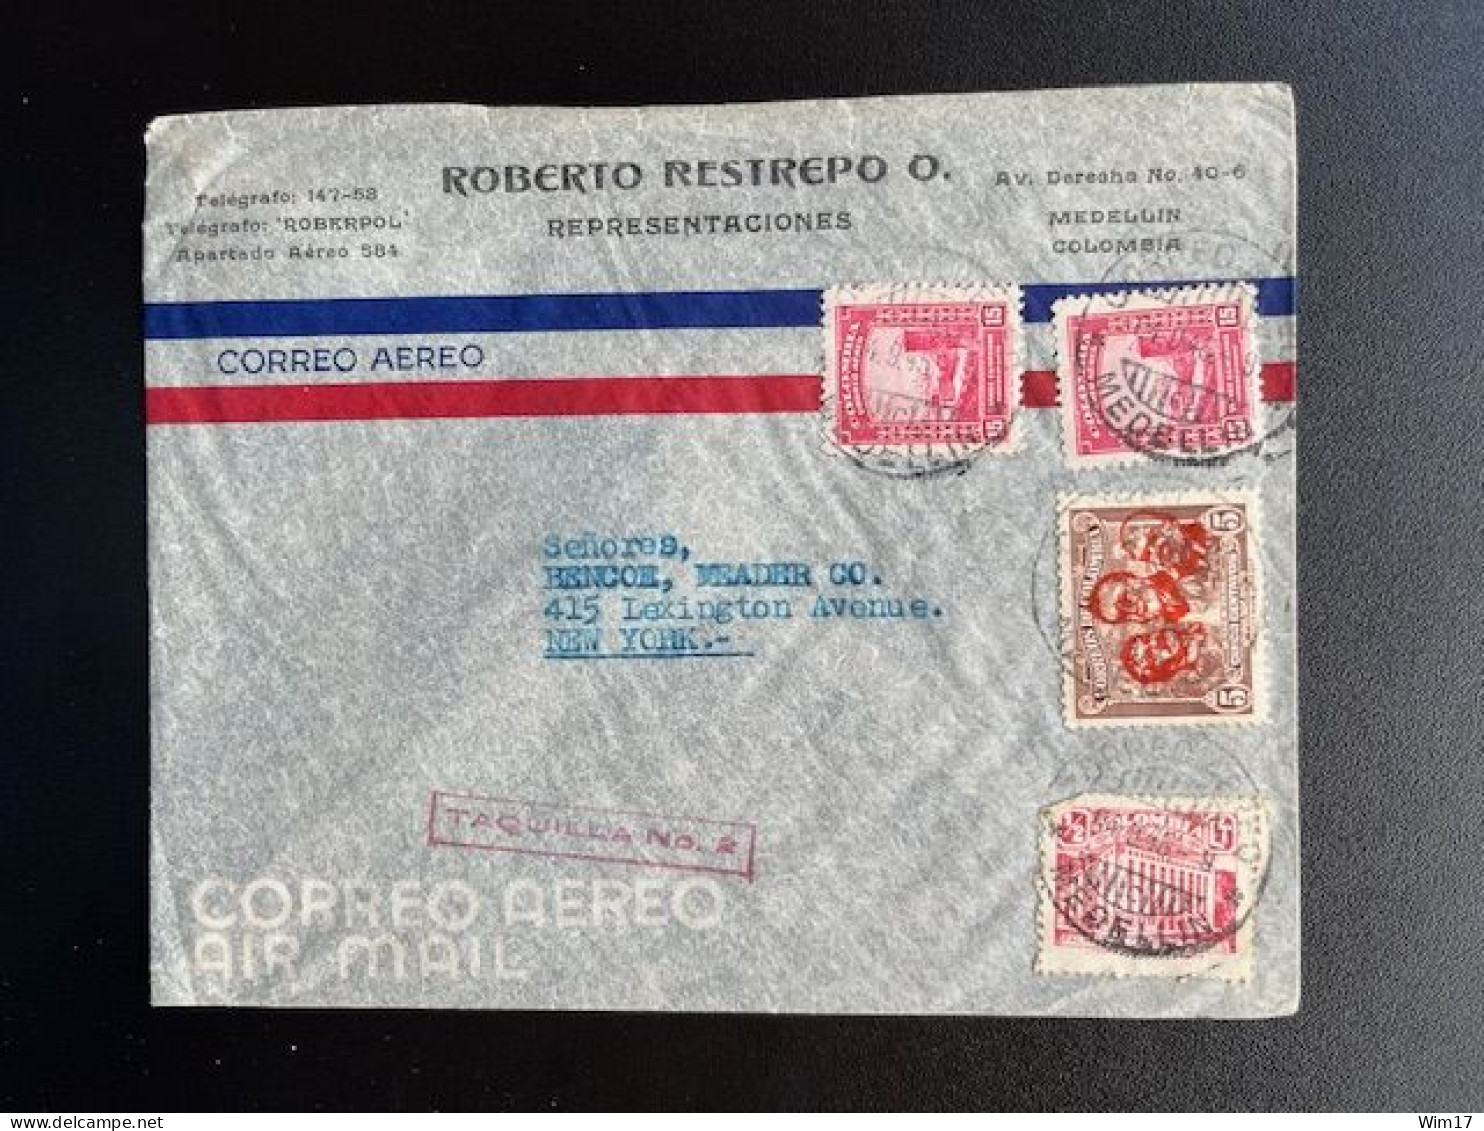 COLOMBIA 1945 AIR MAIL LETTER MEDELLIN TO NEW YORK 04-09-1945 - Colombie